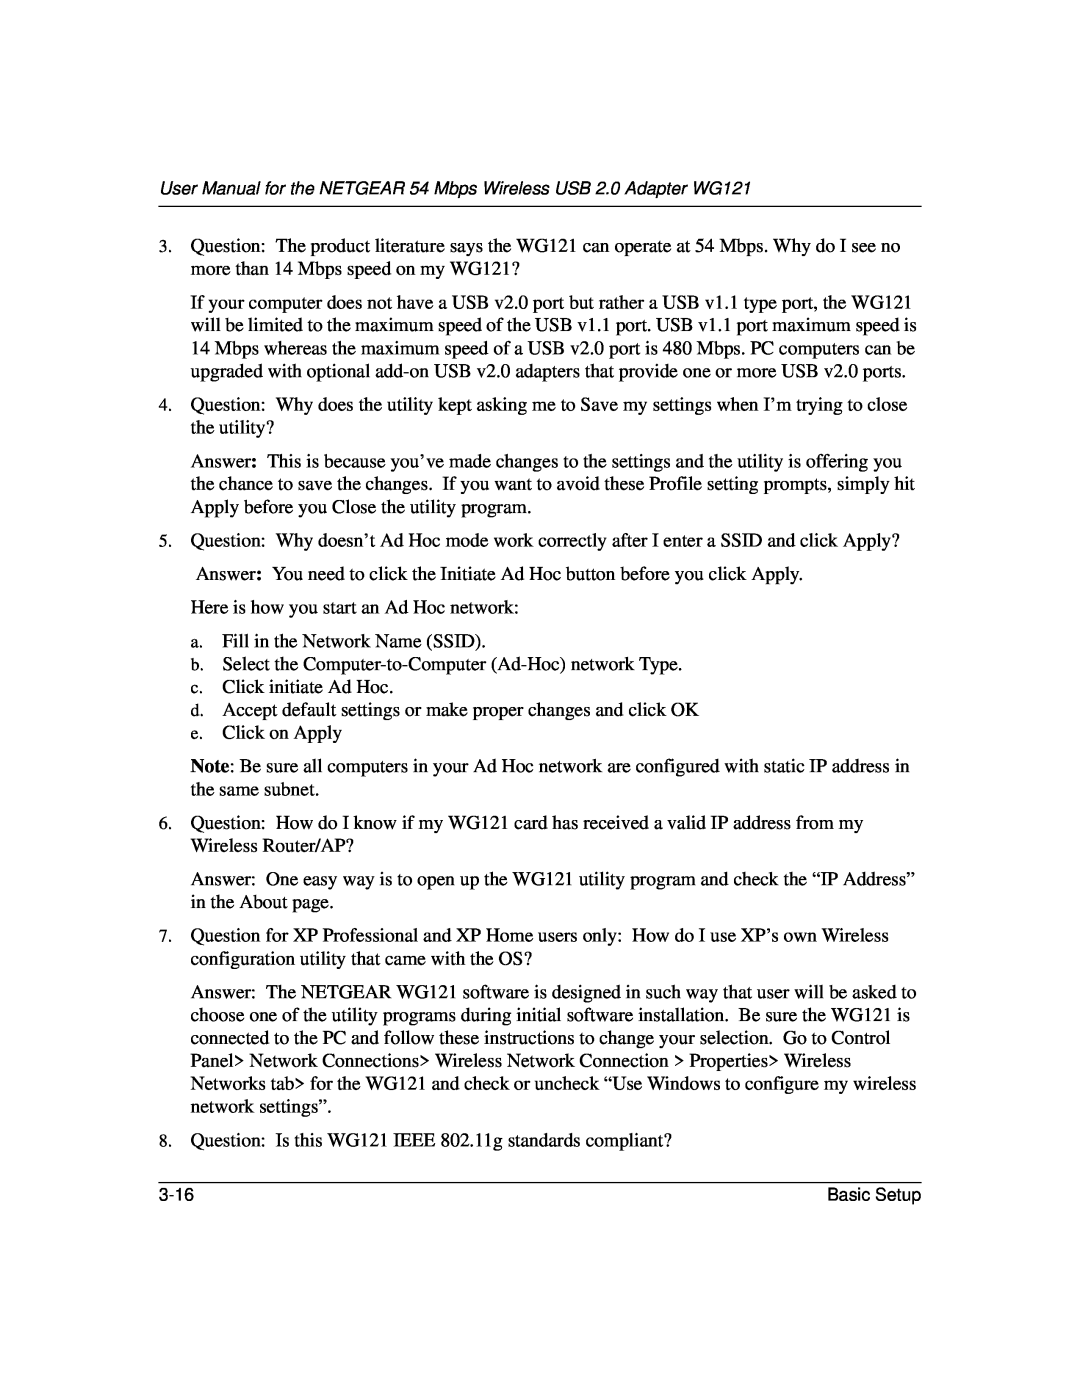 NETGEAR WG121 user manual a. Fill in the Network Name SSID 